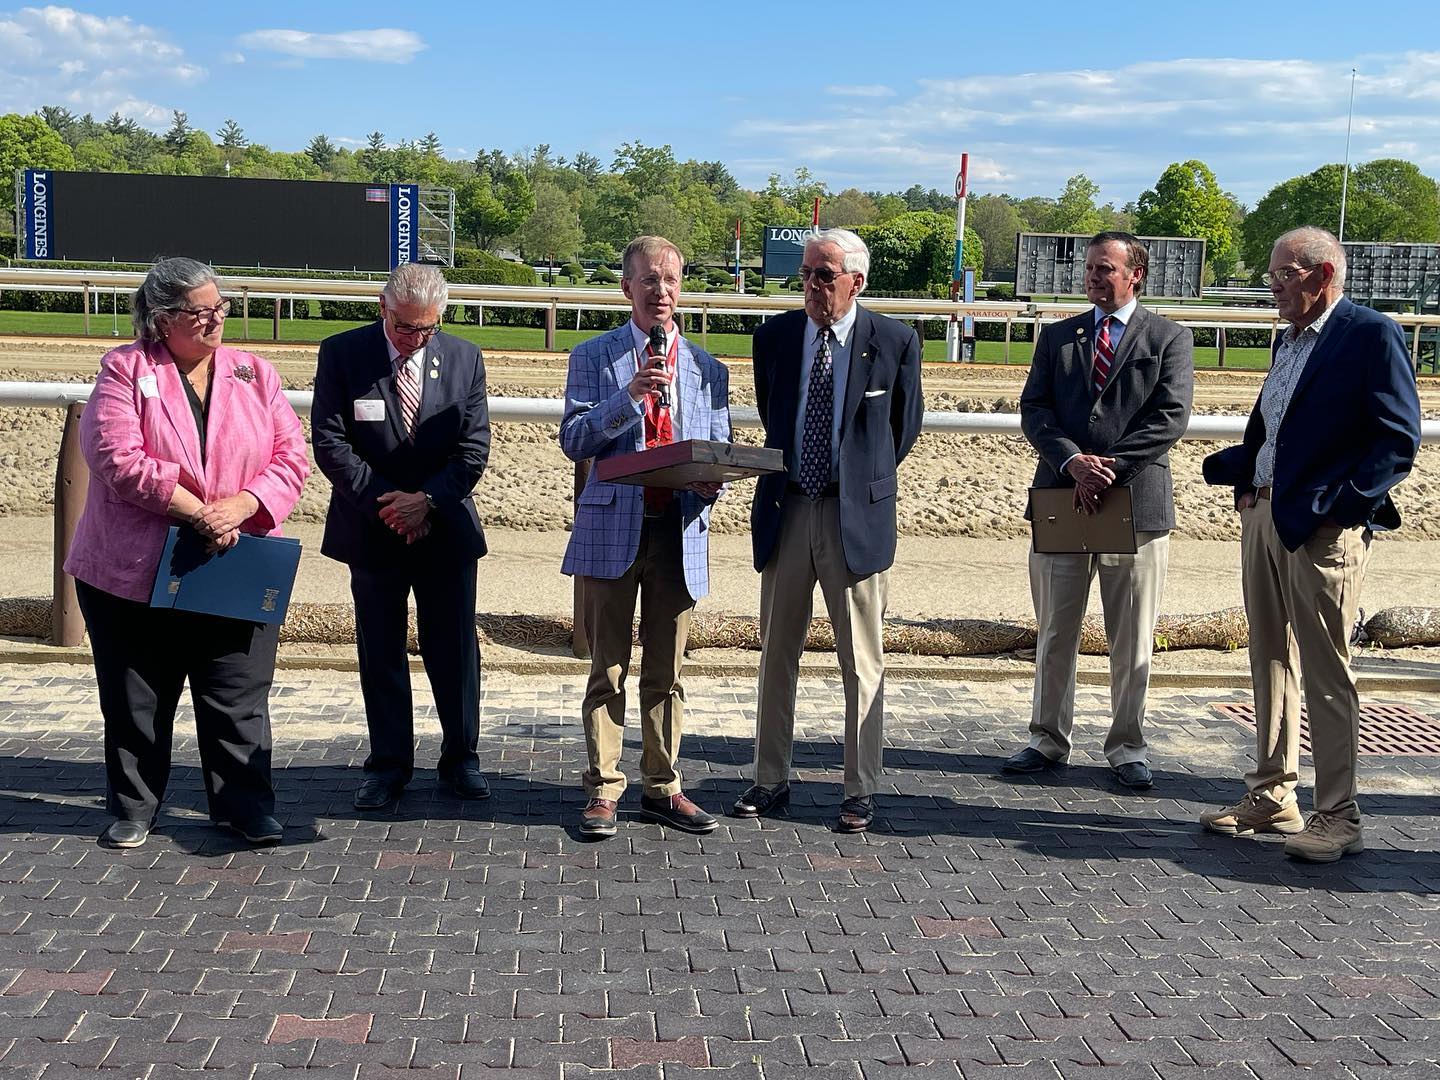 Chamber hosts reimagined annual event at Saratoga Race Course